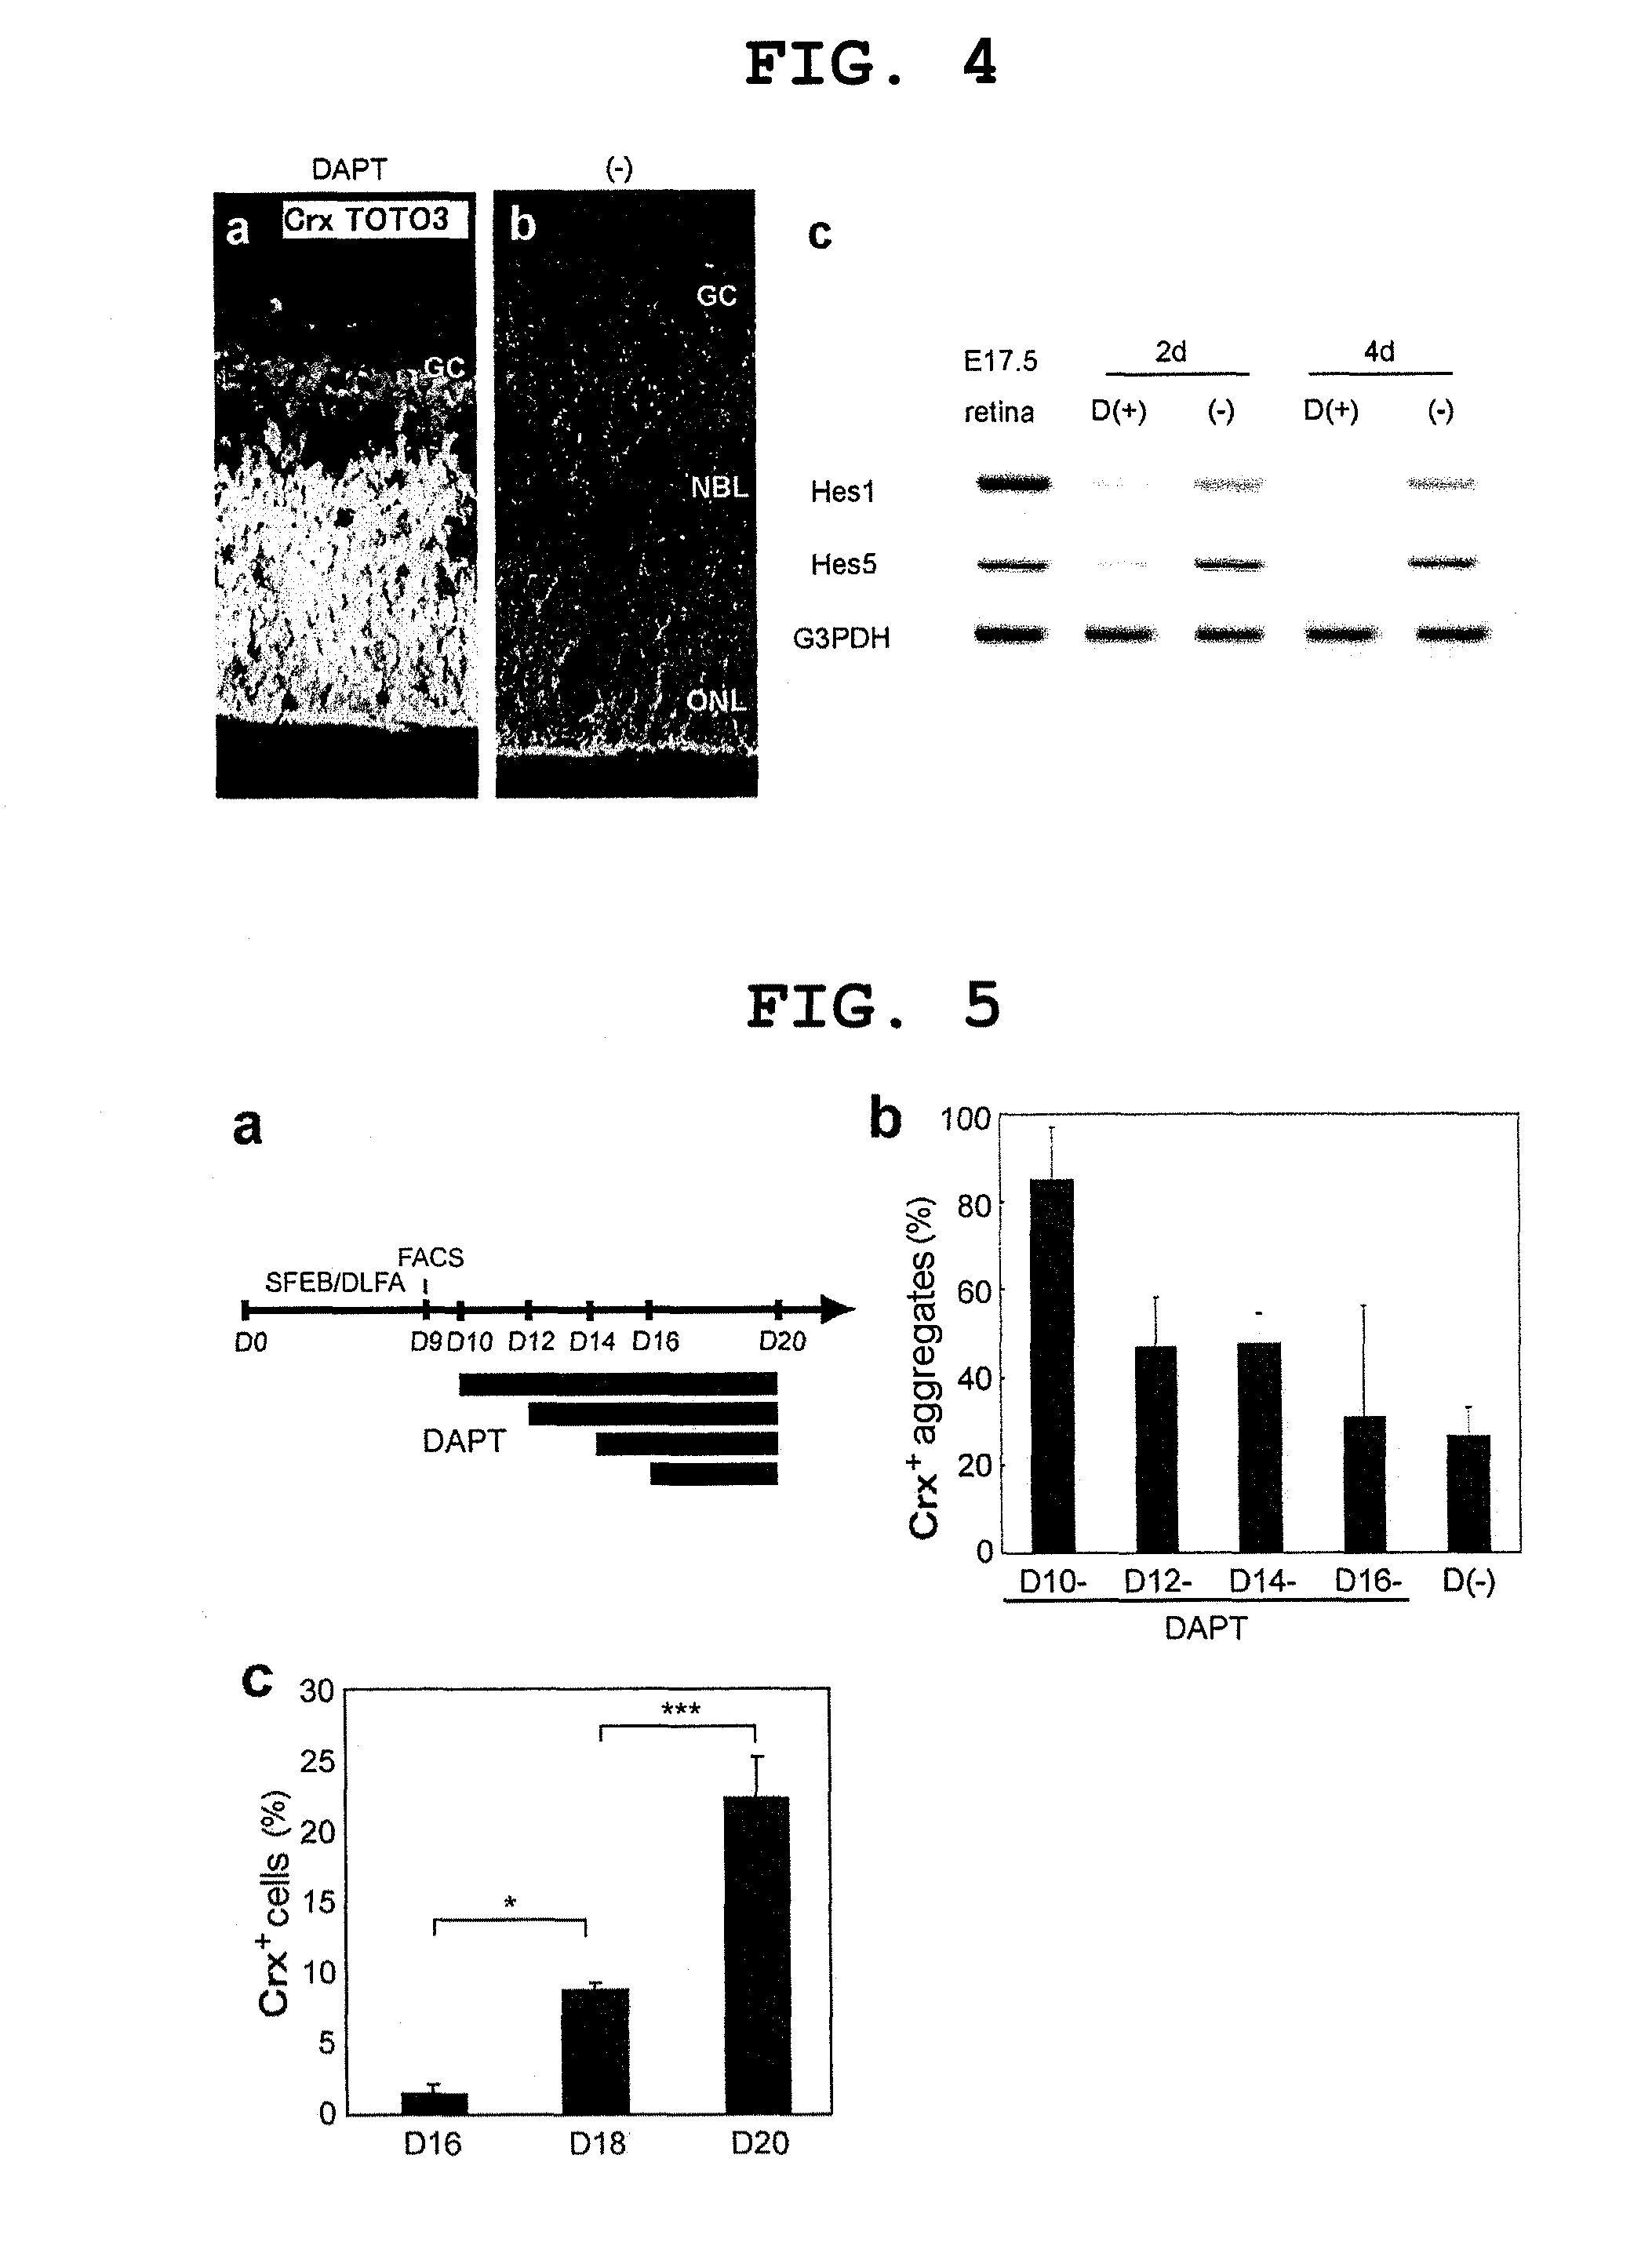 Method for induction/differentiation into photoreceptor cell